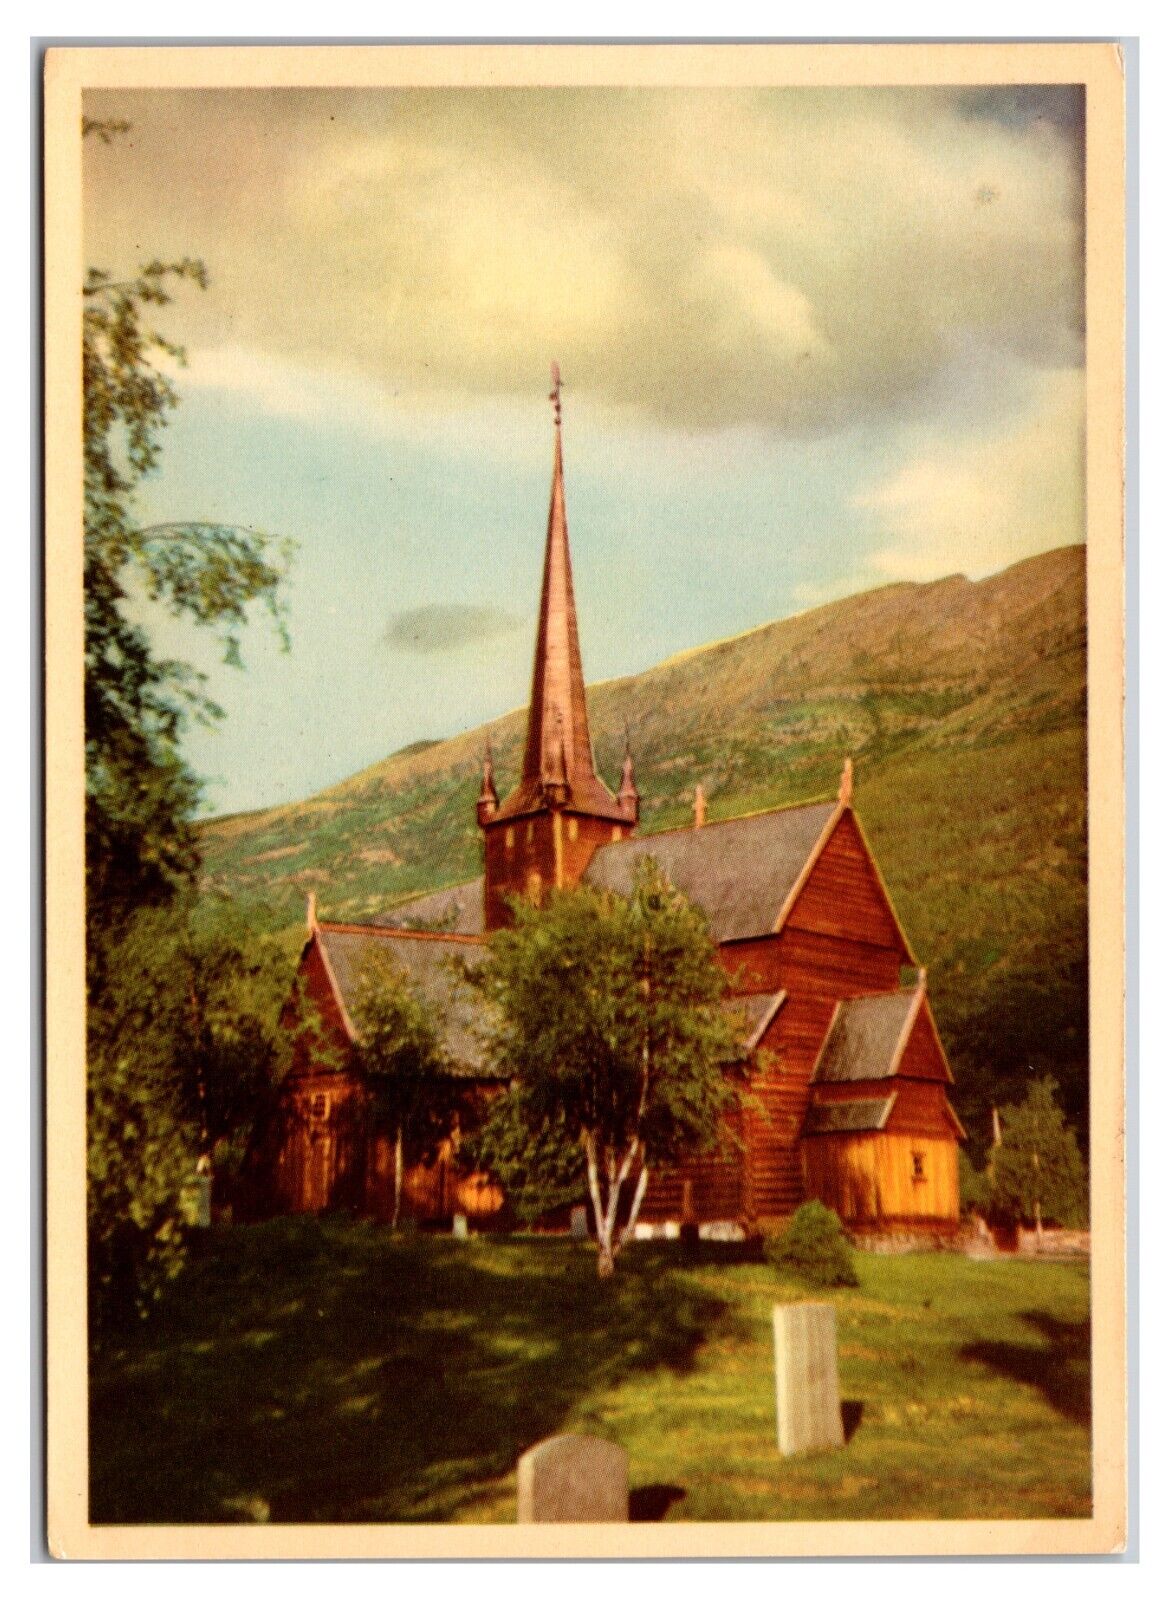 Vintage 1960s - Lom Stave Church- Fossbergom, Norway Postcard (UnPosted)